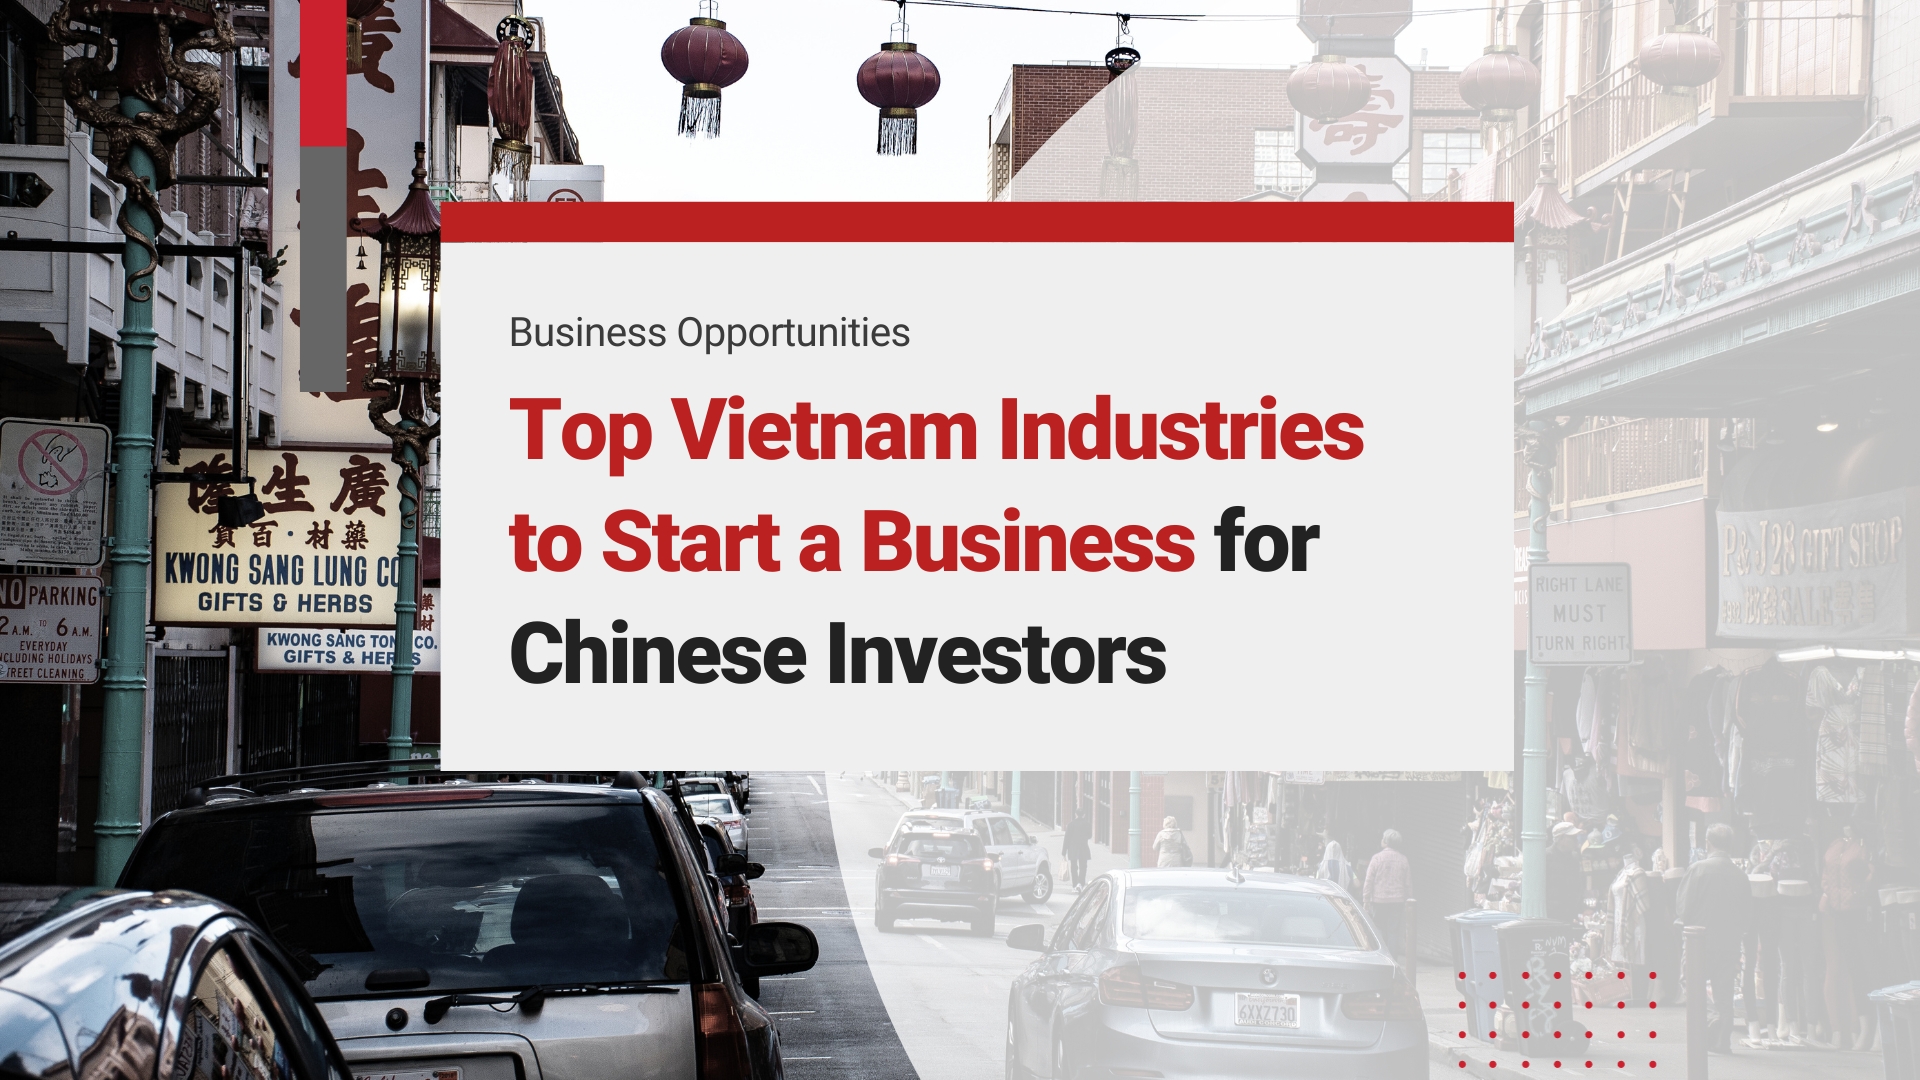 Top Vietnam Industries to Start a Business for Chinese Investors